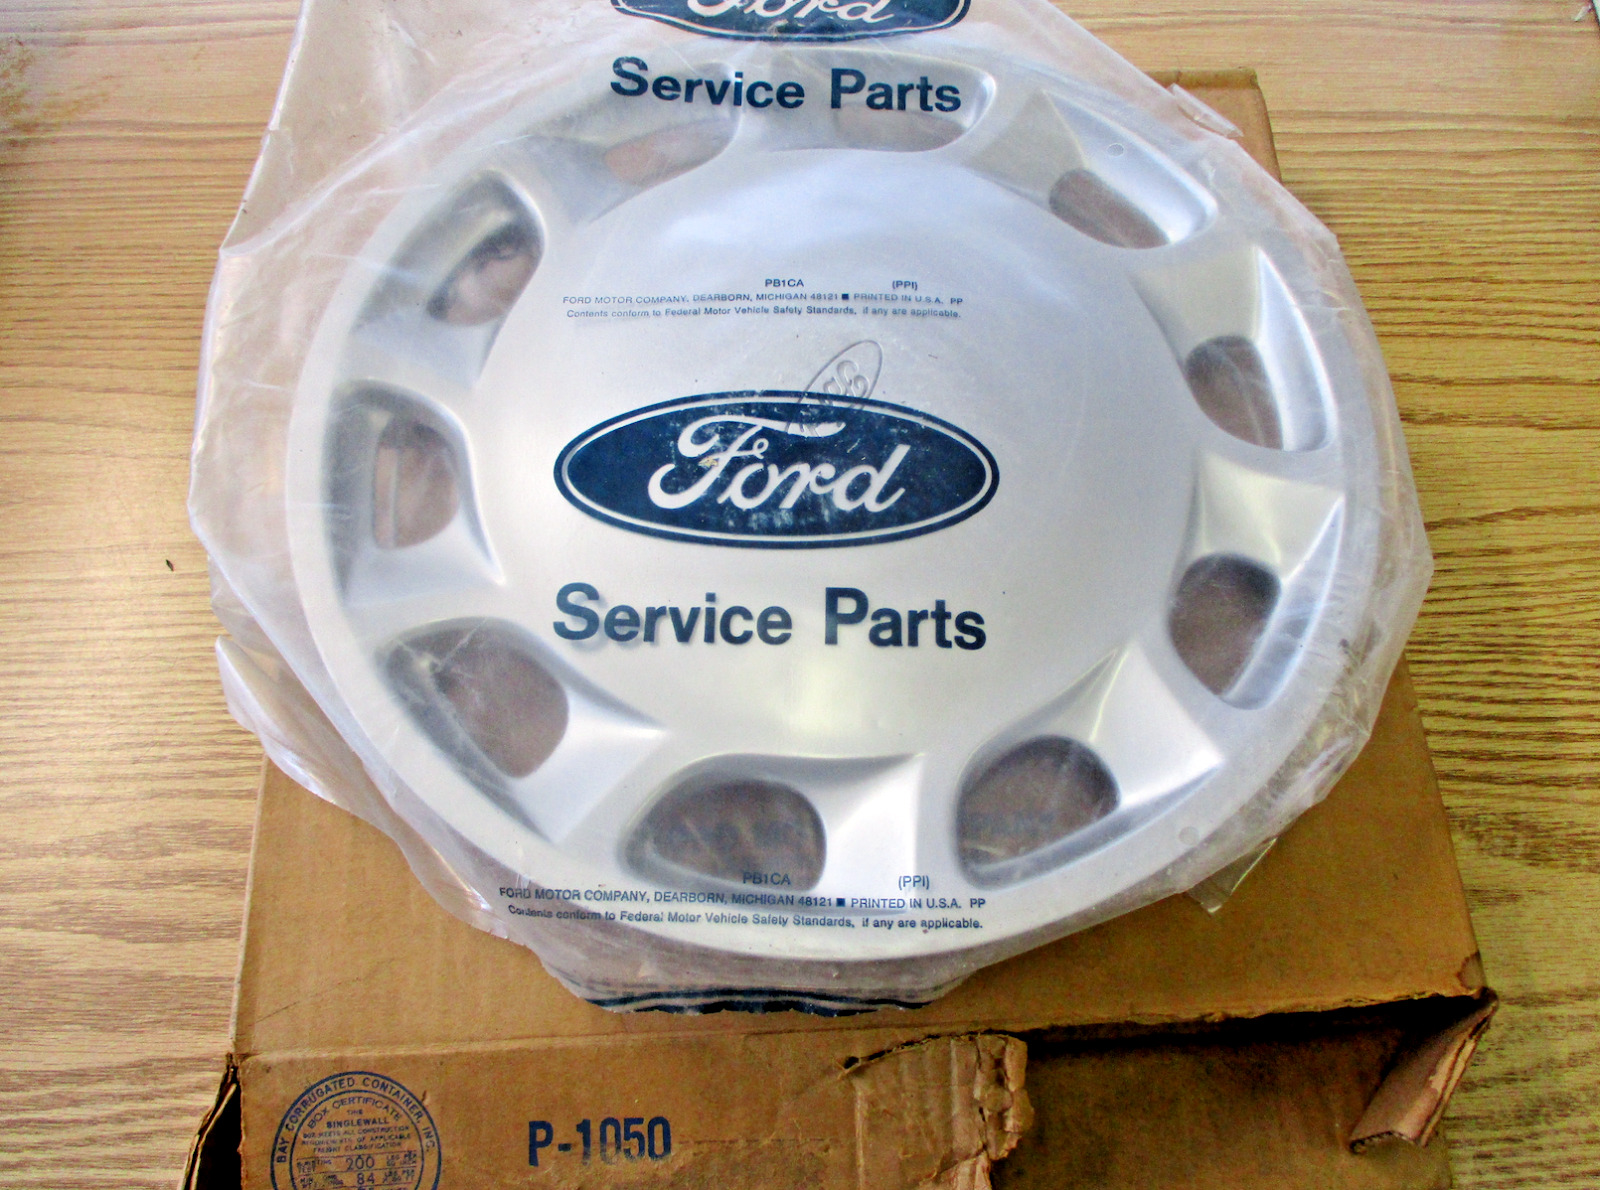 One factory NOS 1991 1992 Ford Escort 13 inch hubcap wheel cover new